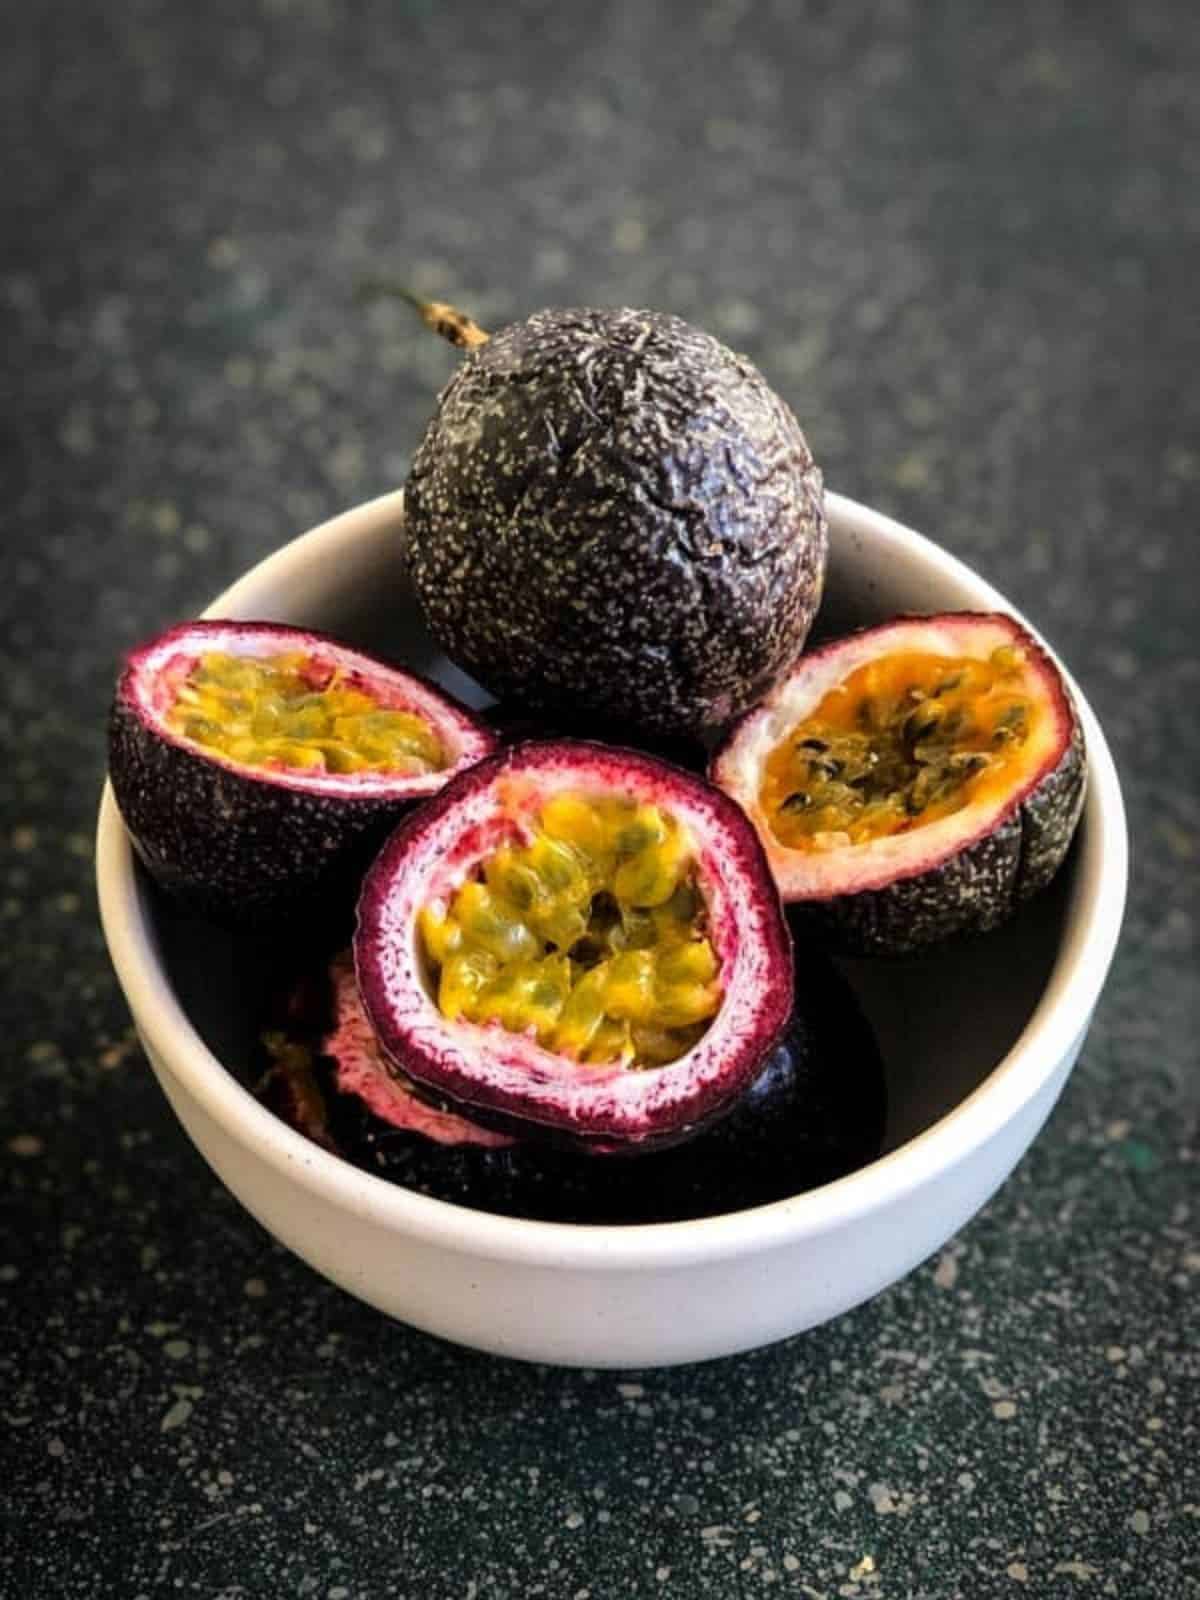 Halved passionfruit in a white bowl